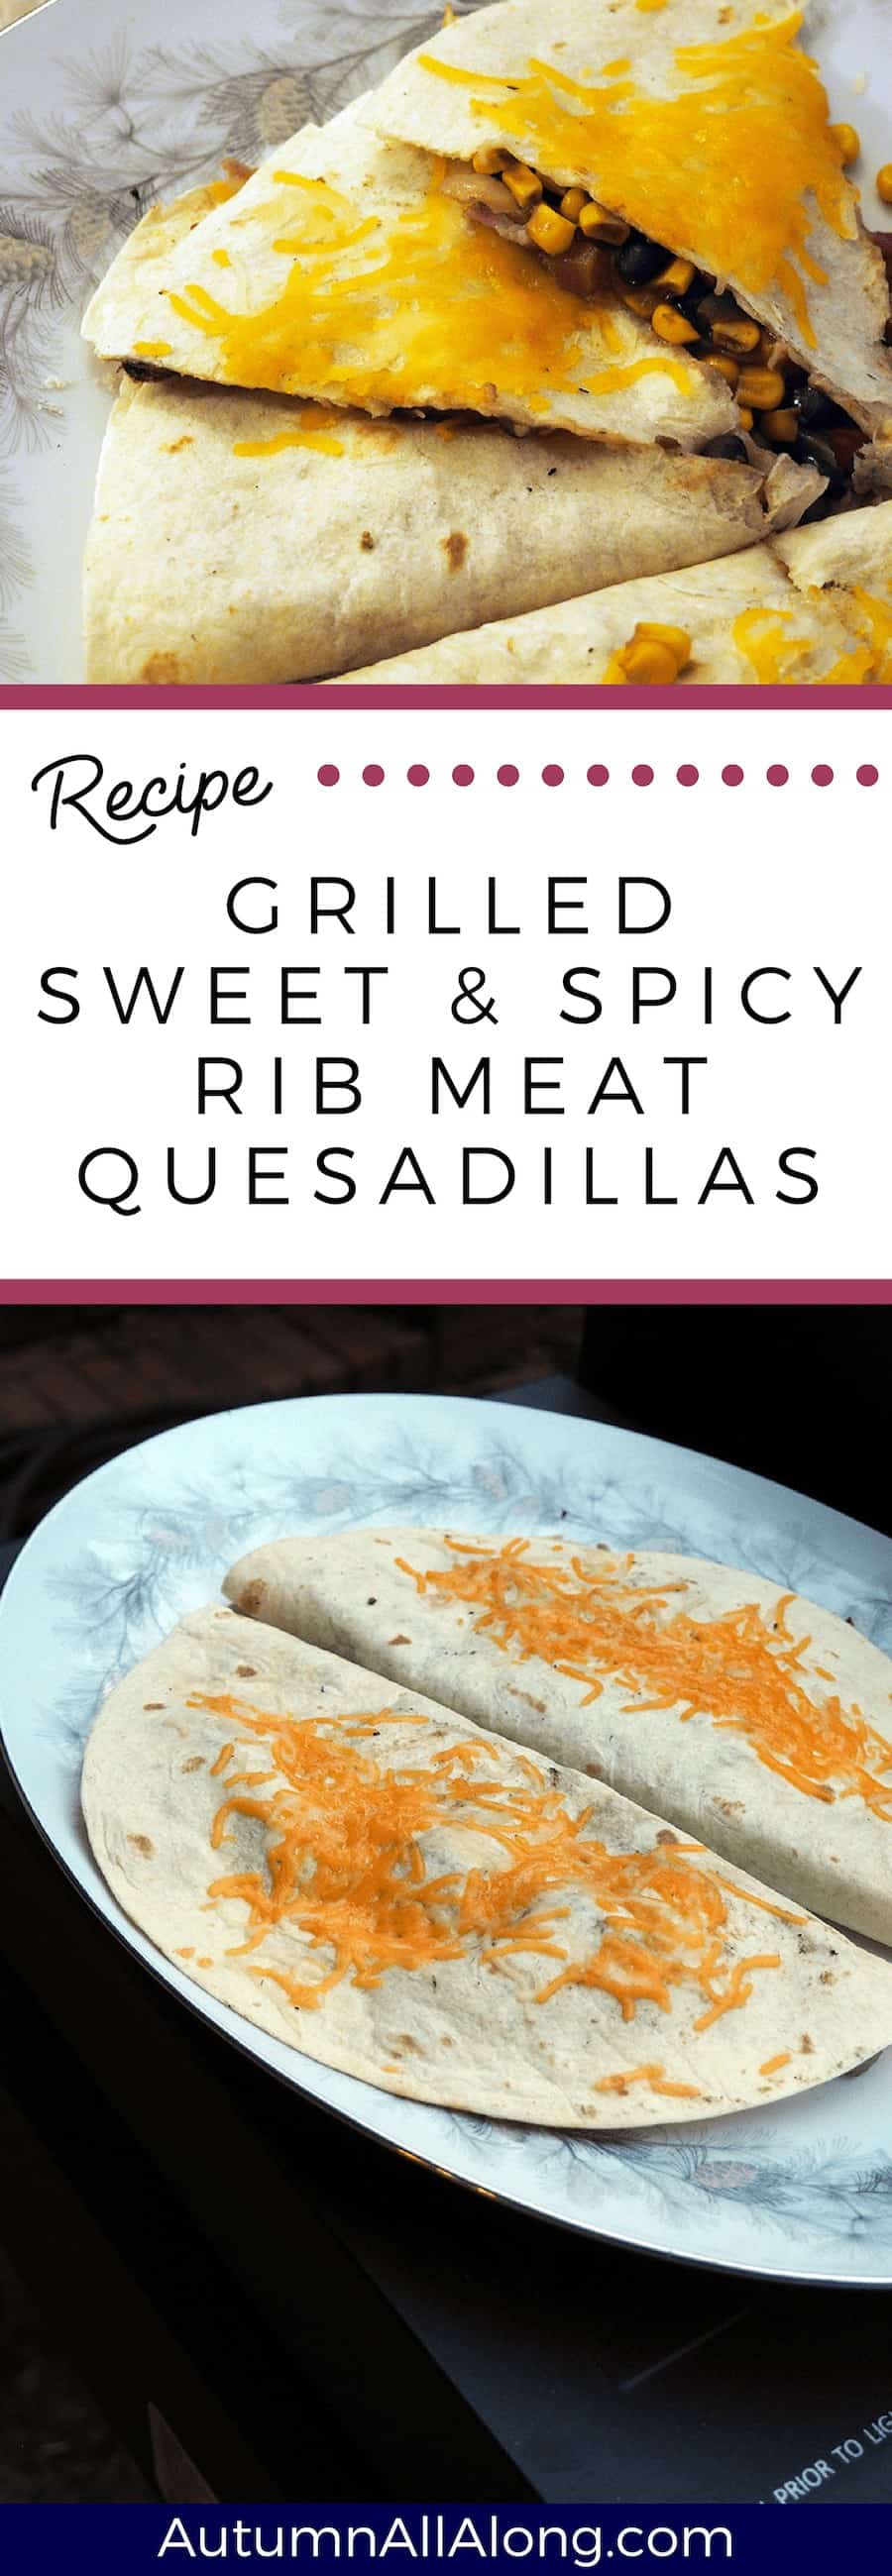 These grilled sweet and spicy rib meat quesadillas will have you skipping your favorite Tex-Mex restaurant and grilling at home instead. #SmithfieldGetGrilling #IC #AD | via Autumn All Along